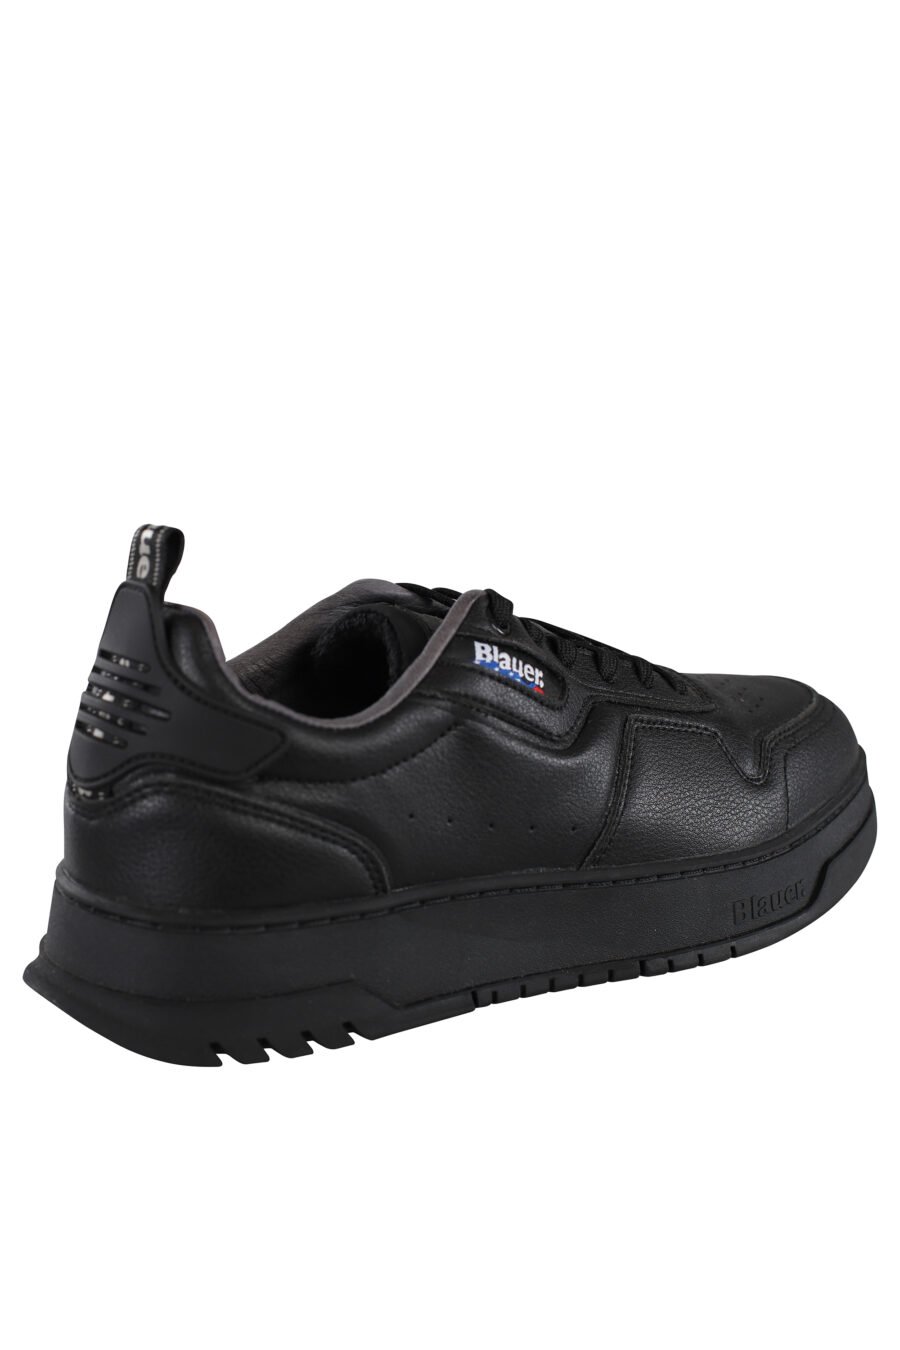 Trainers "harper" black leather with logo - IMG 6828